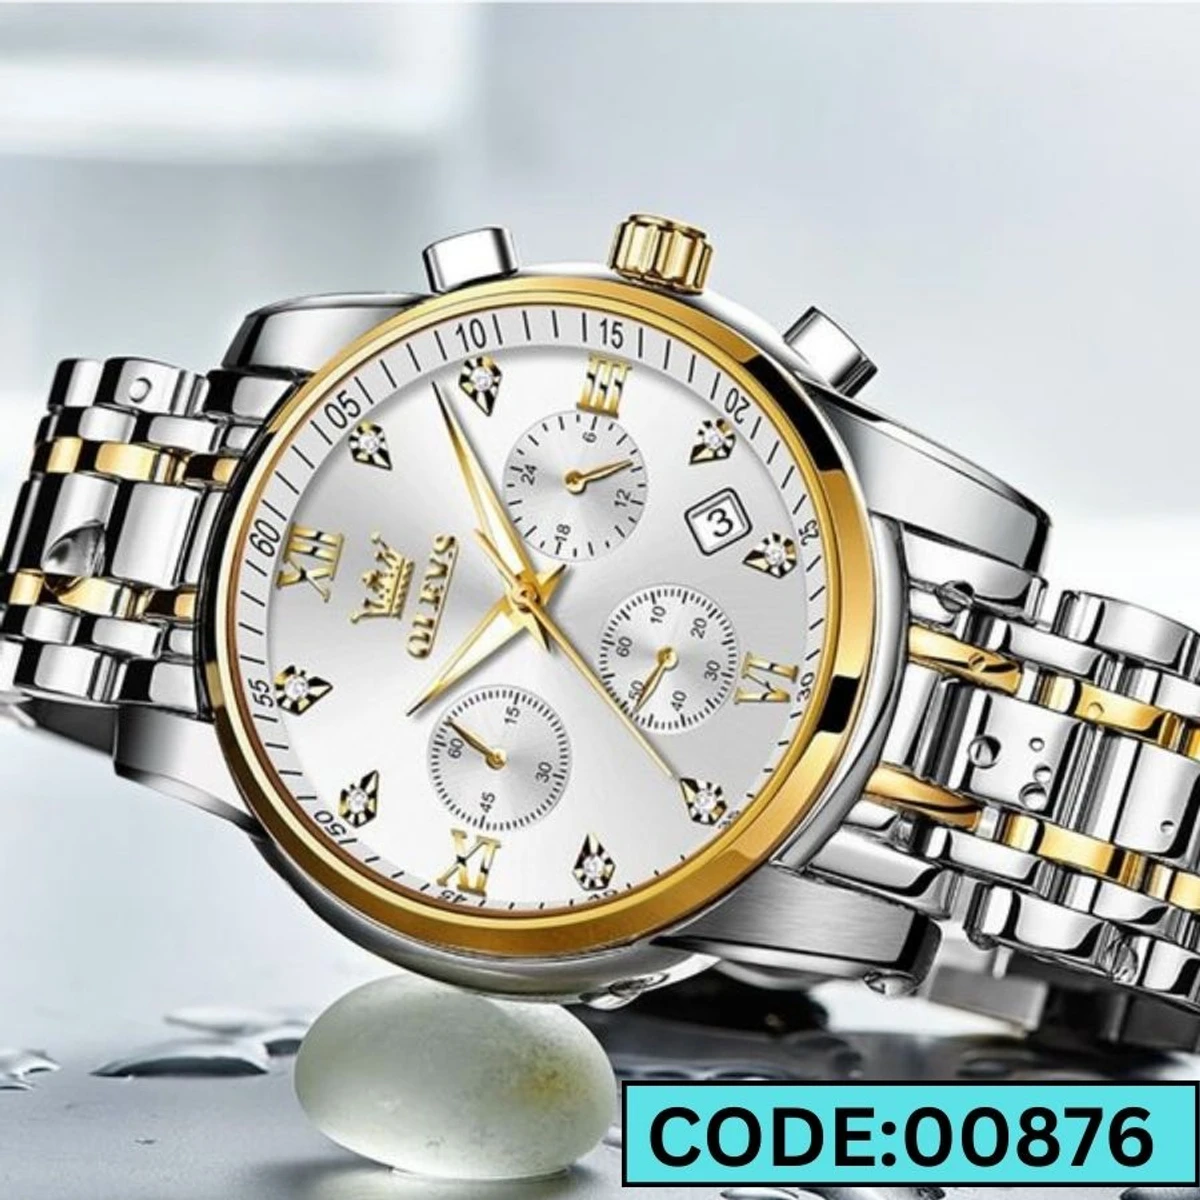 OLEVS MODEL 2858 Watch for Men Stainless Steel Watches - 2858 TOTON AR DIAL WHITE ROUND GOLDEN COOLER WATCH - MAN WATCH